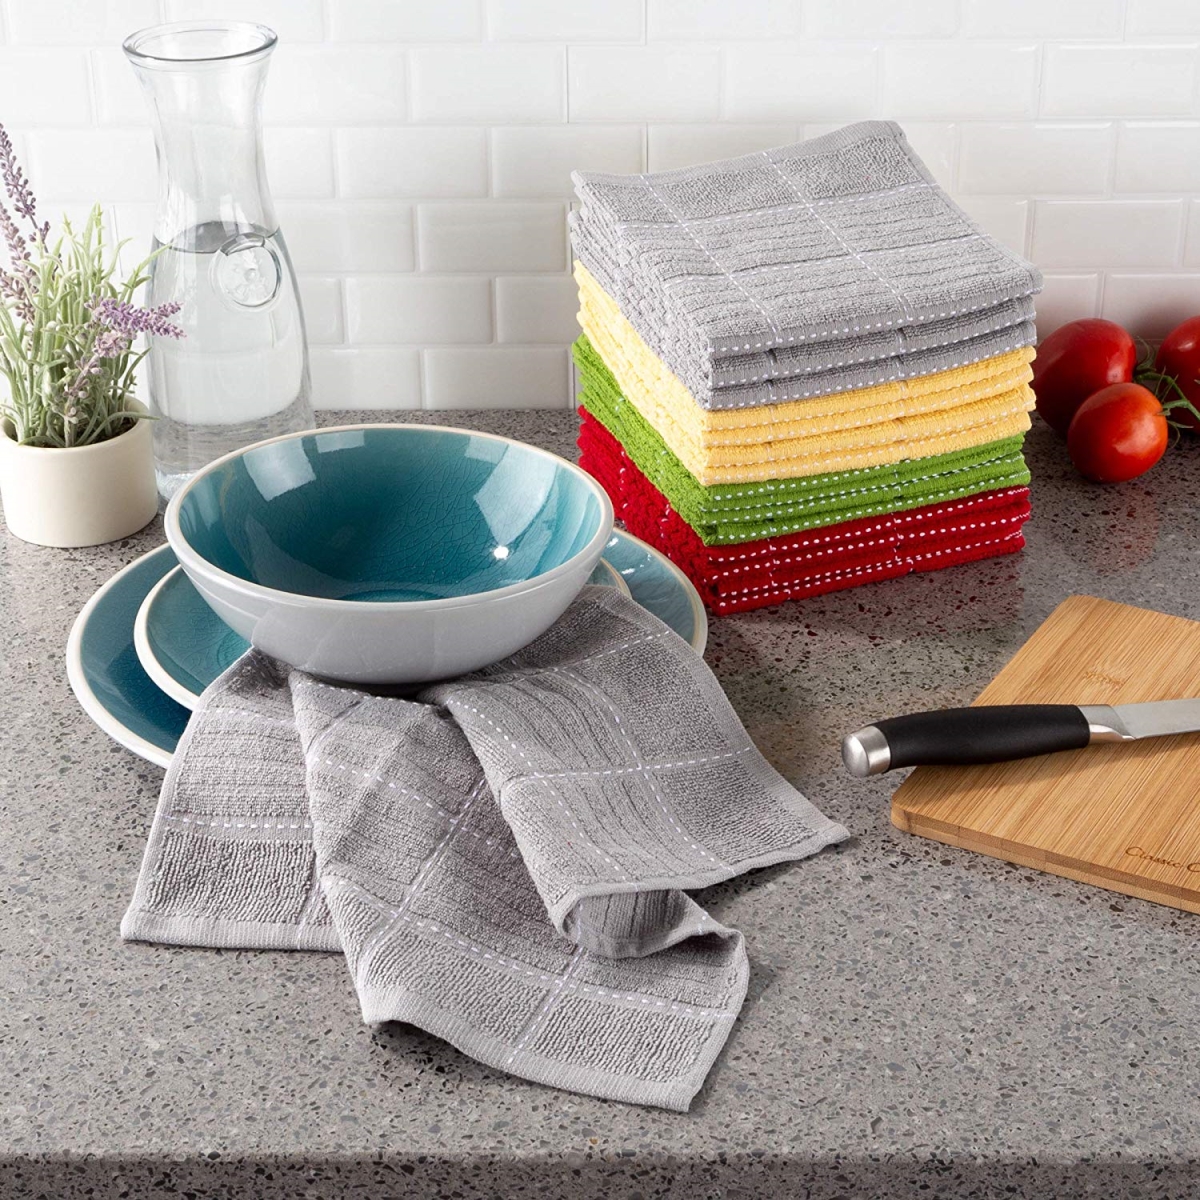 69a-39260 12.5 X 12.5 In. Home Kitchen Dish Cloth, Multi-color -set Of 16